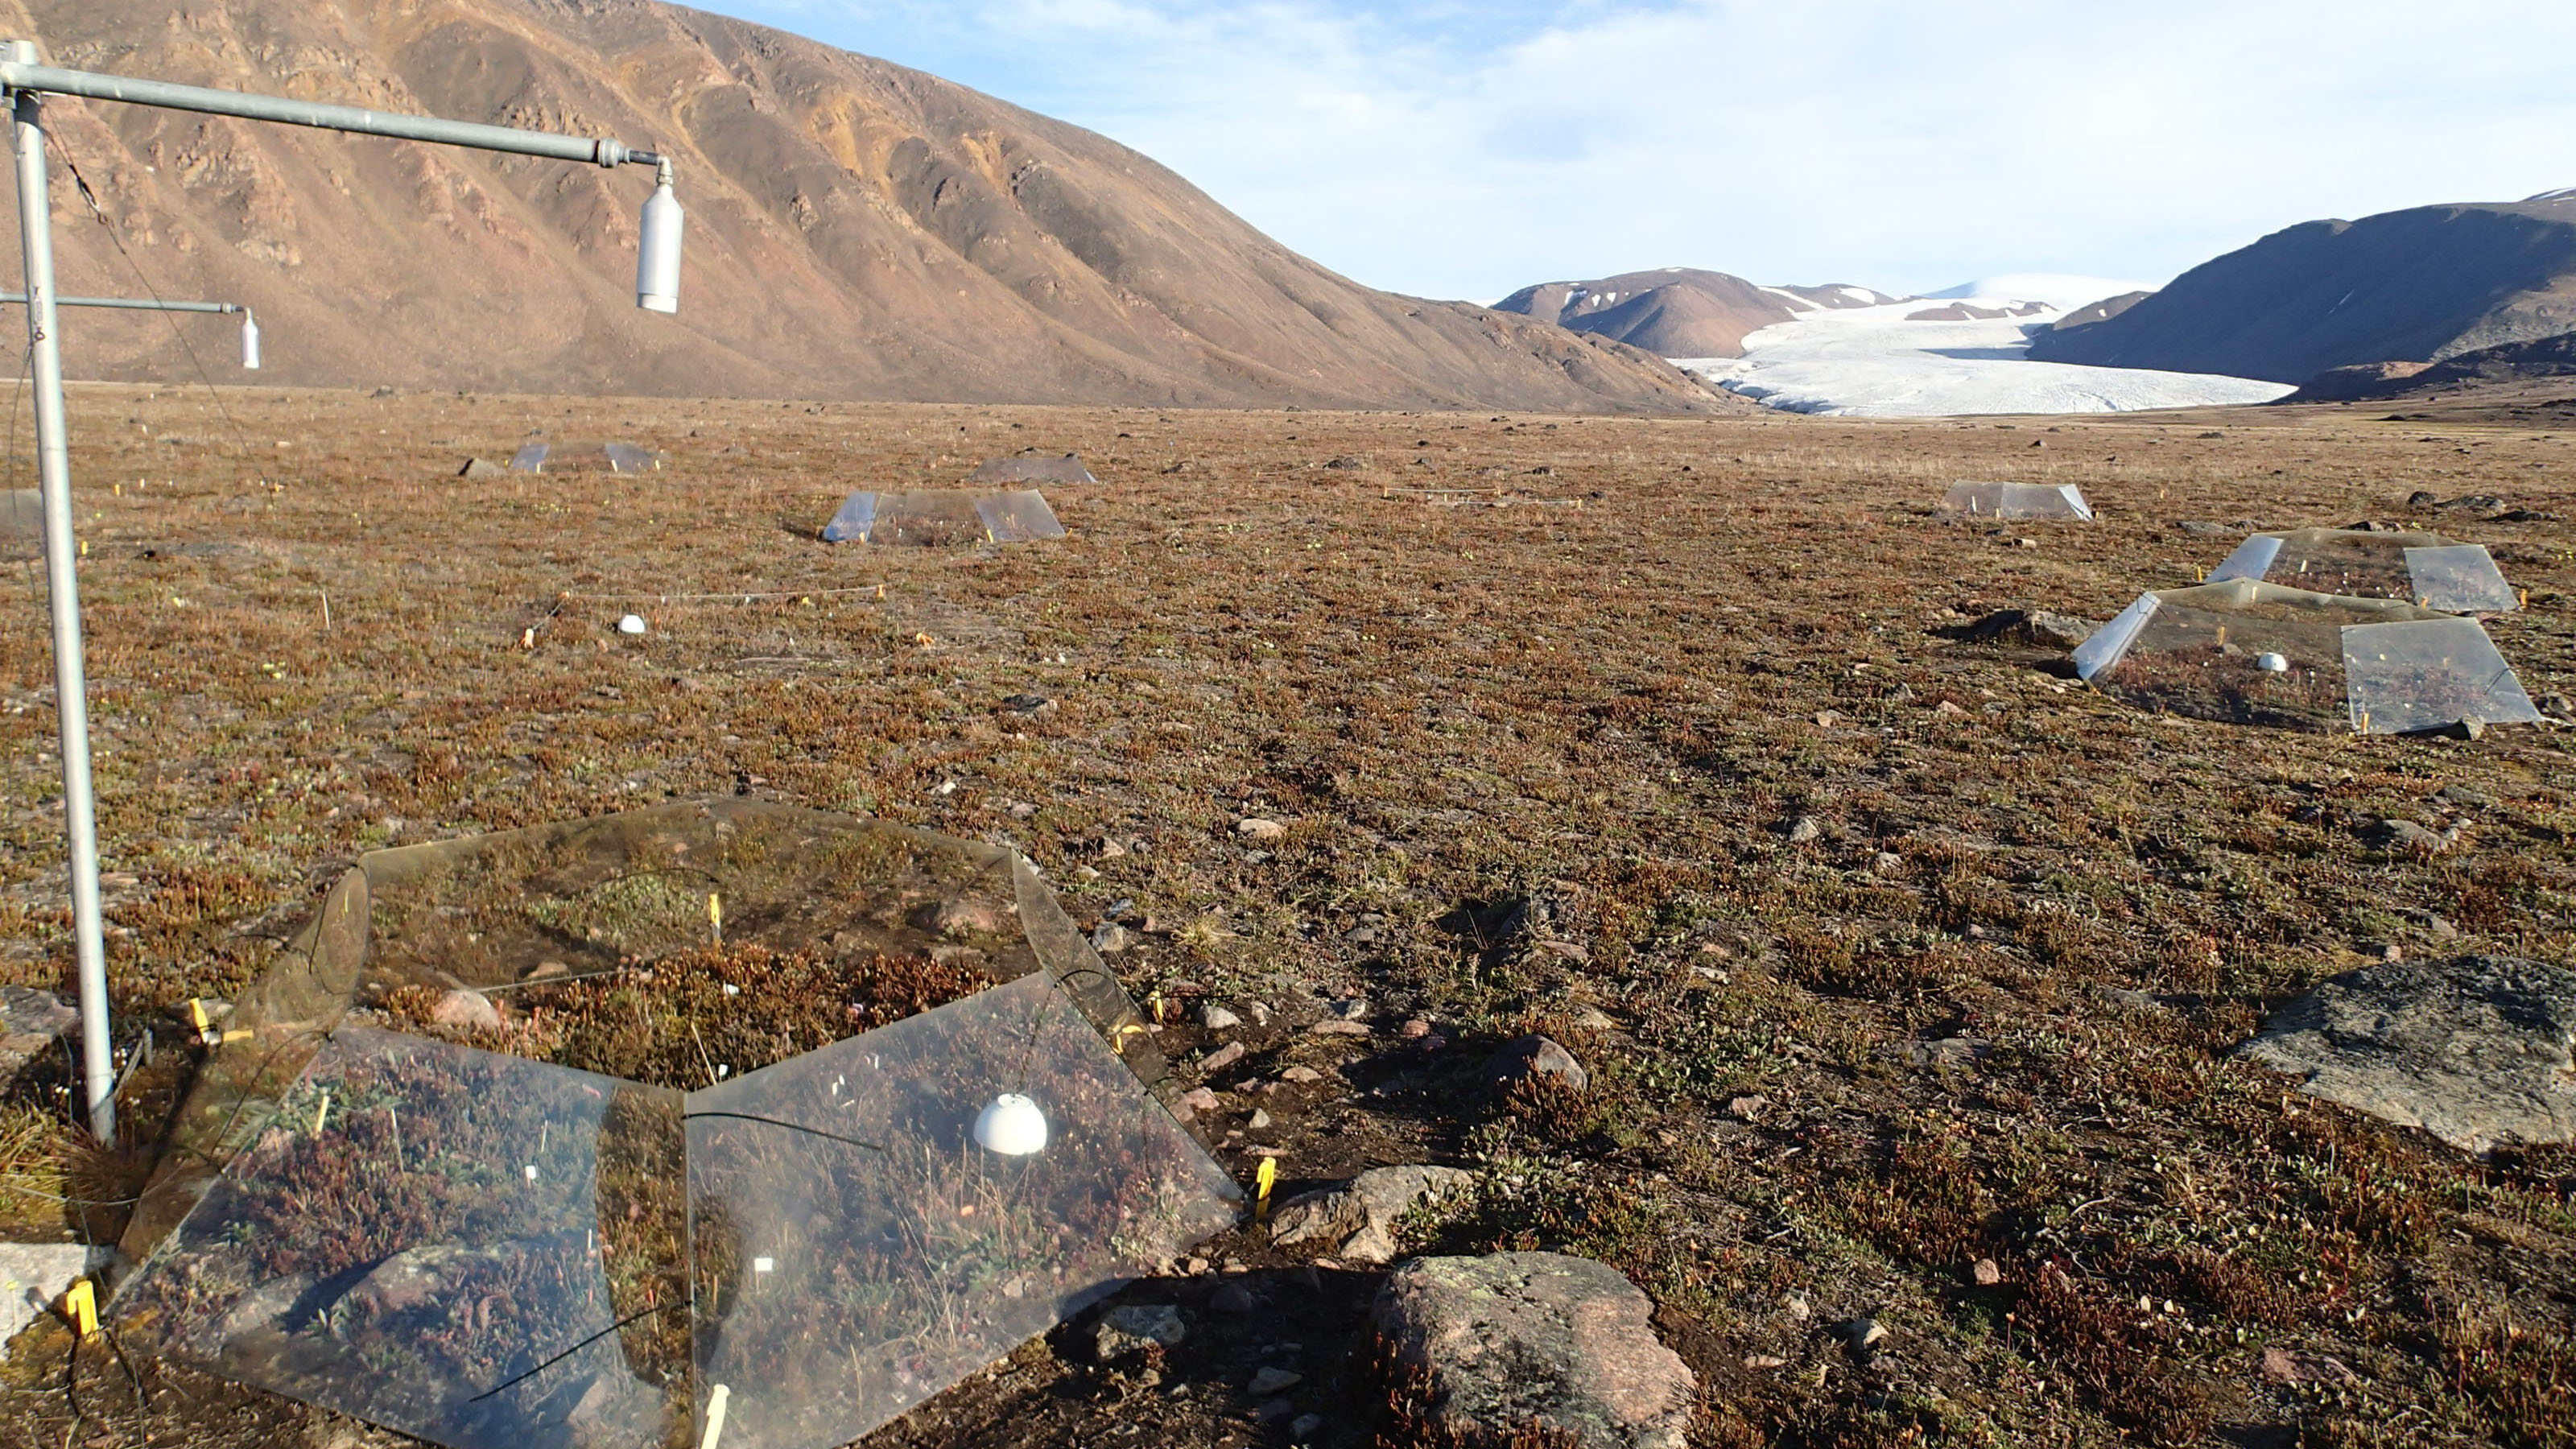 A tundra landscape with gently sloping mountains and a glacier in the background. Clear hexagons with open tops are dotted around the foreground, where they enclose patches of delicate tundra plants.